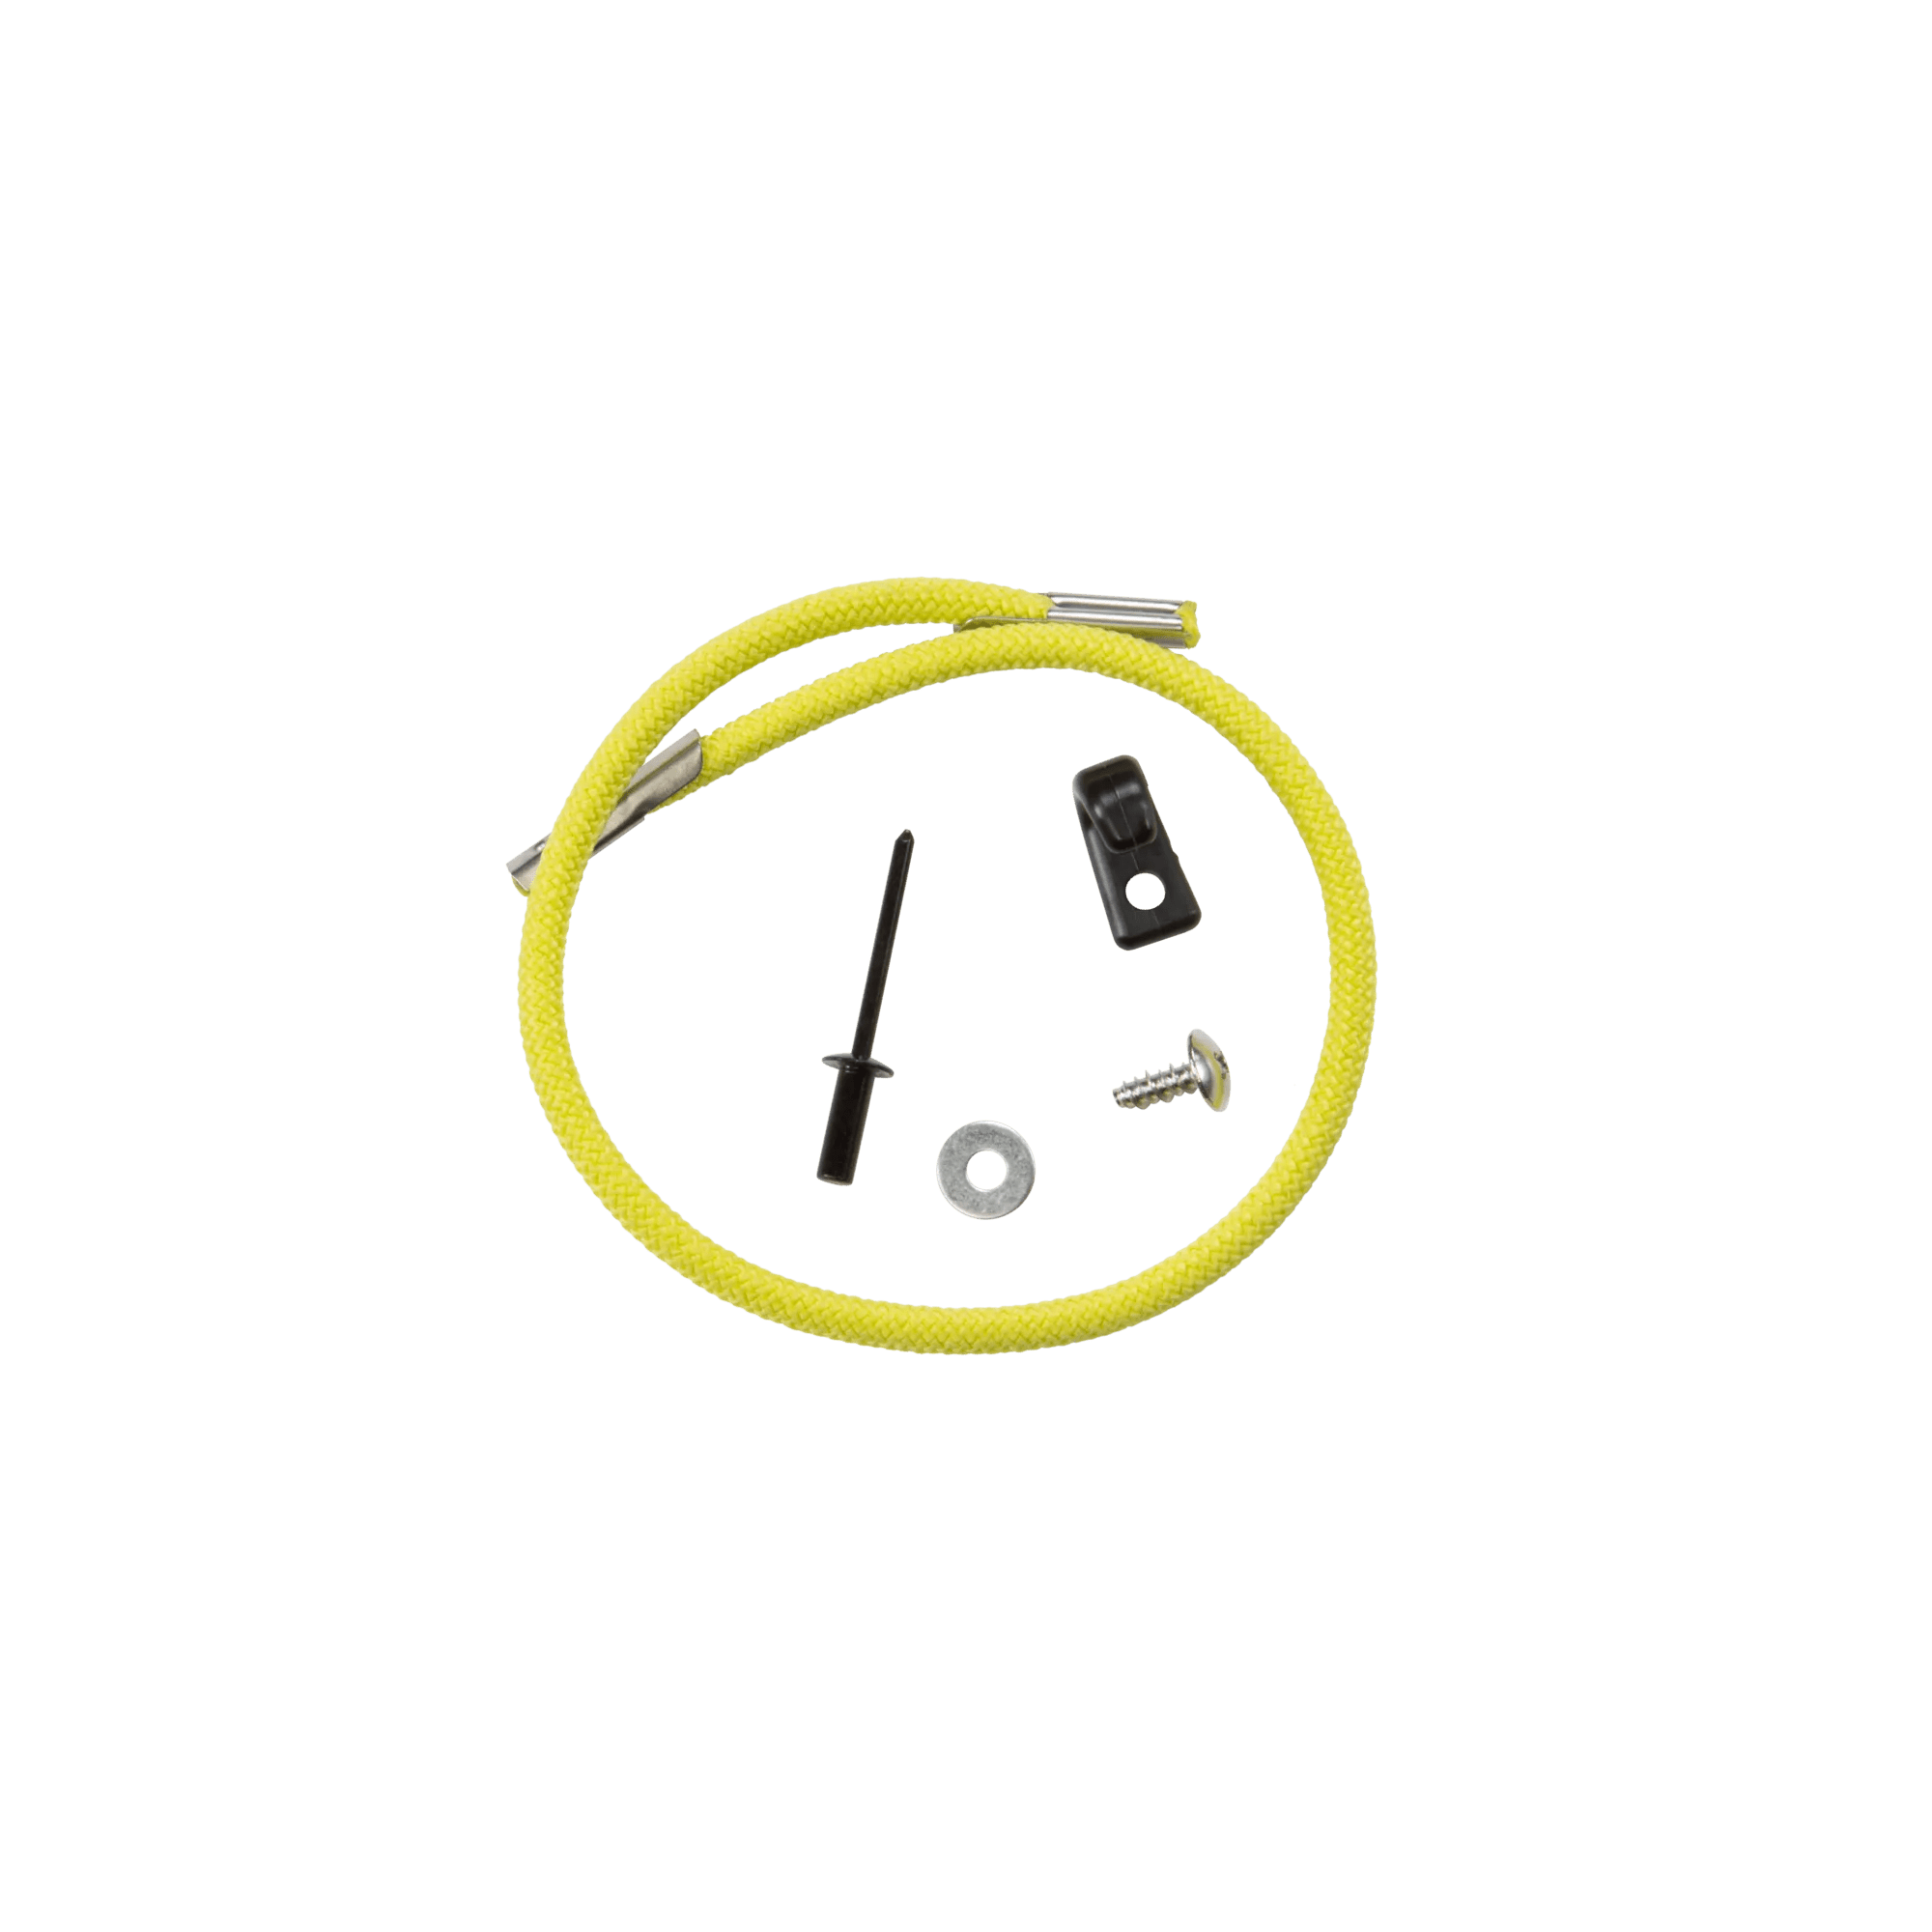 PELICAN - Yellow Green 16" (40.6 cm) Multi-Purpose Bungee Cord with Hook -  - PS1822 - ISO 